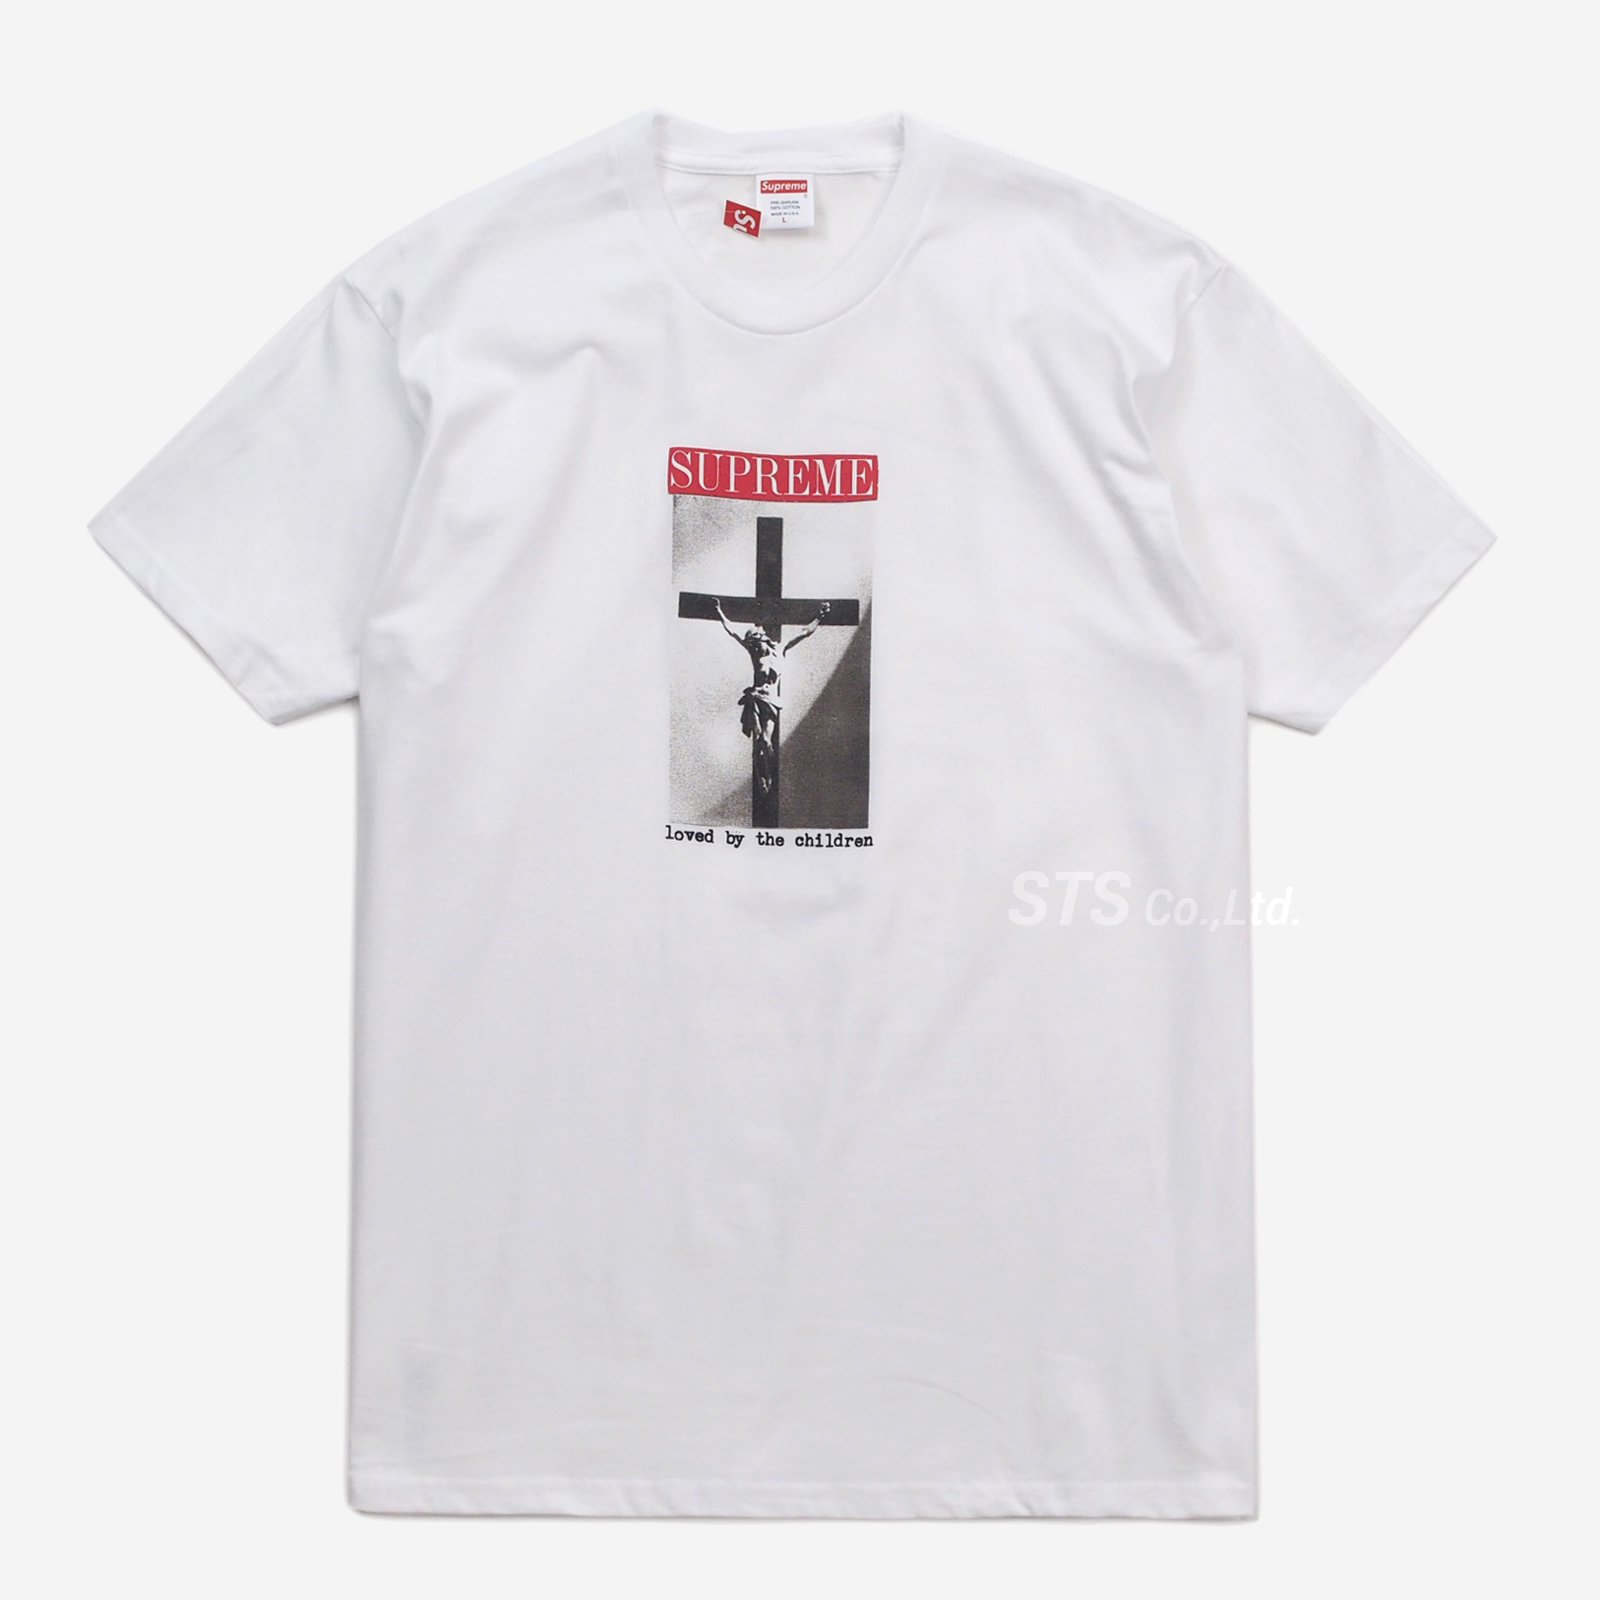 Tシャツ/カットソー(半袖/袖なし)20SS Supreme Loved By The Children Tee